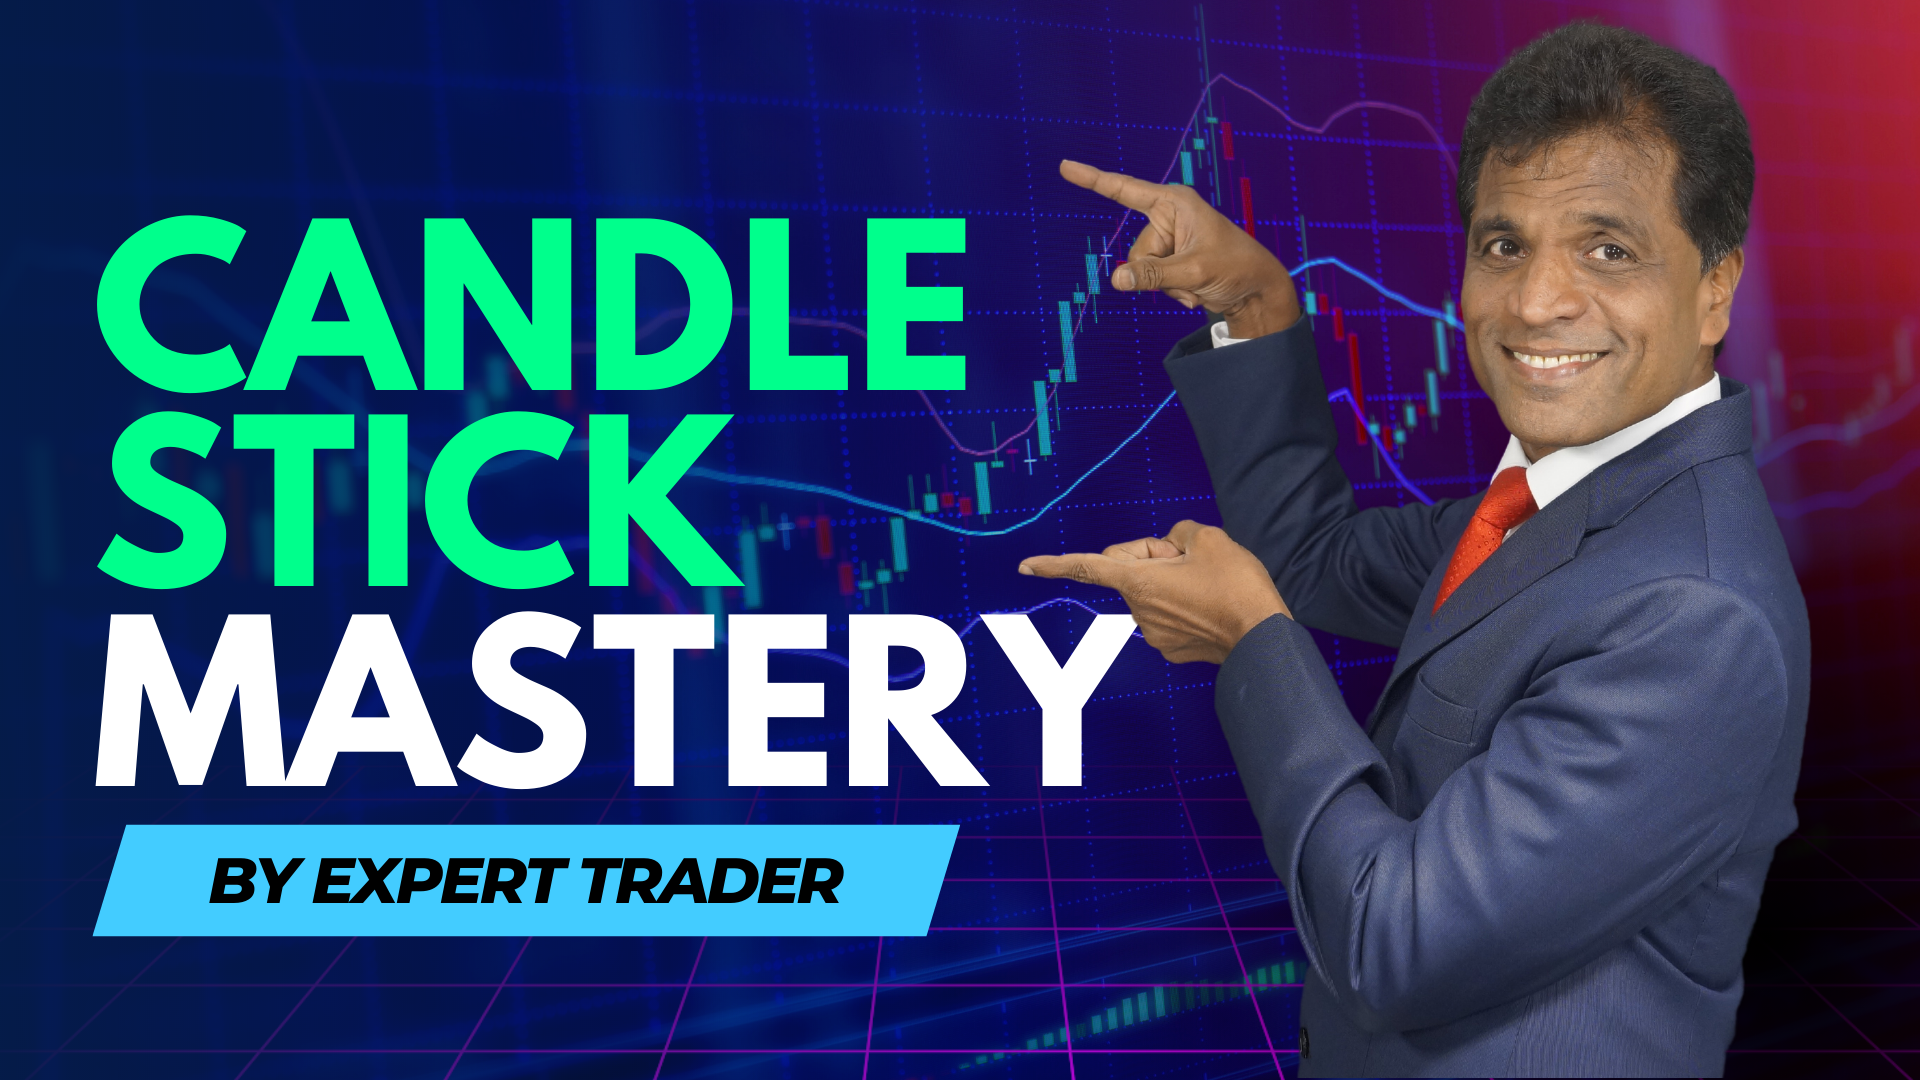 Candle Stick Mastery Course Latest Wealth